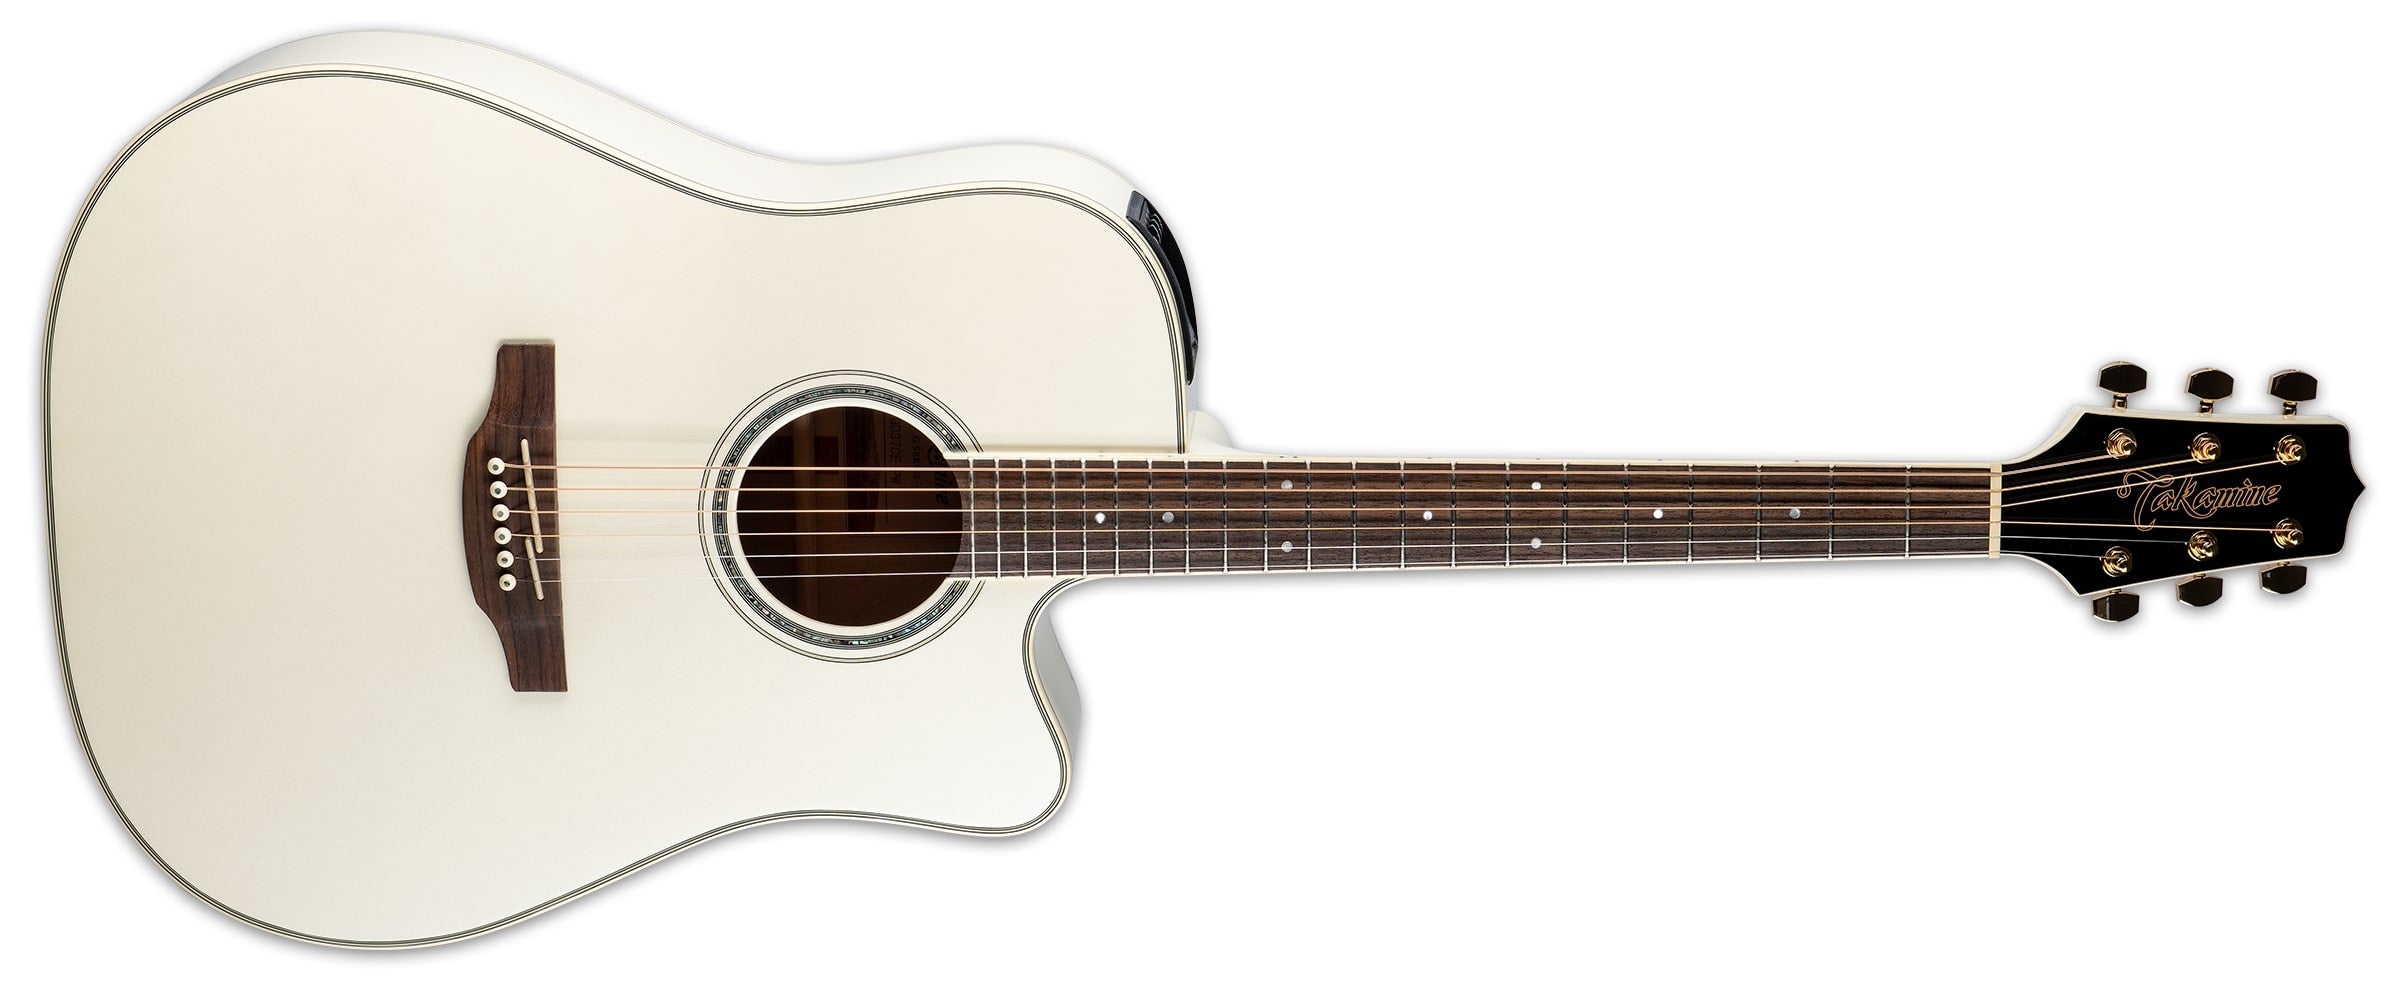 Takamine G Series Steel String Dreadnought Acoustic / Electric Guitar, Pearl White GD37CE-PW